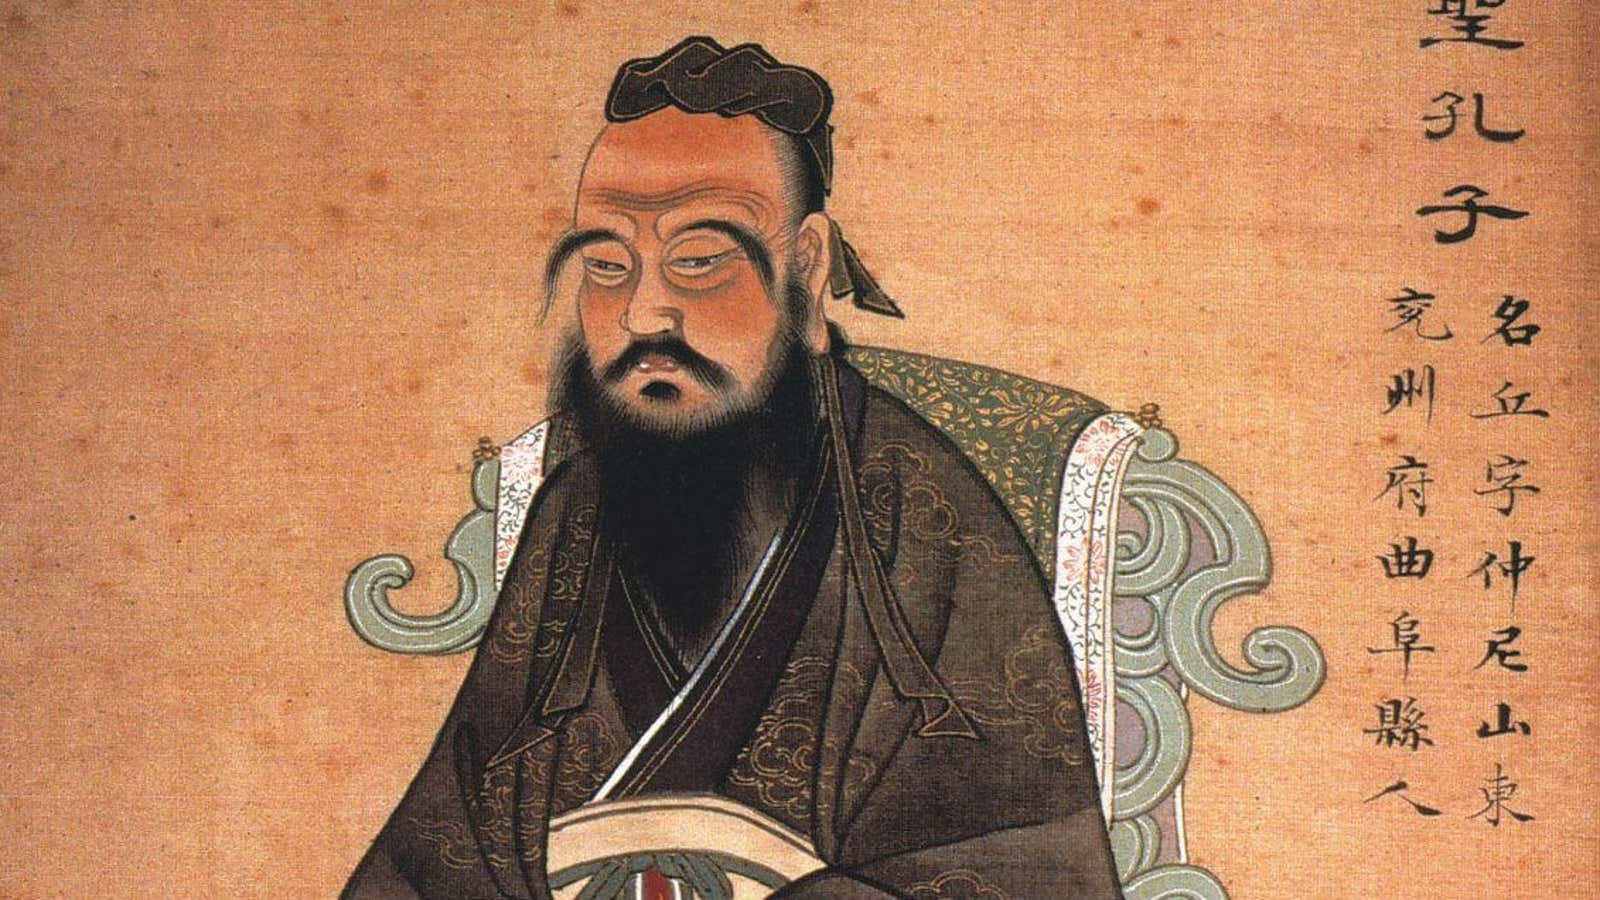 Thousands of years on, Confucius’s influence is still felt.